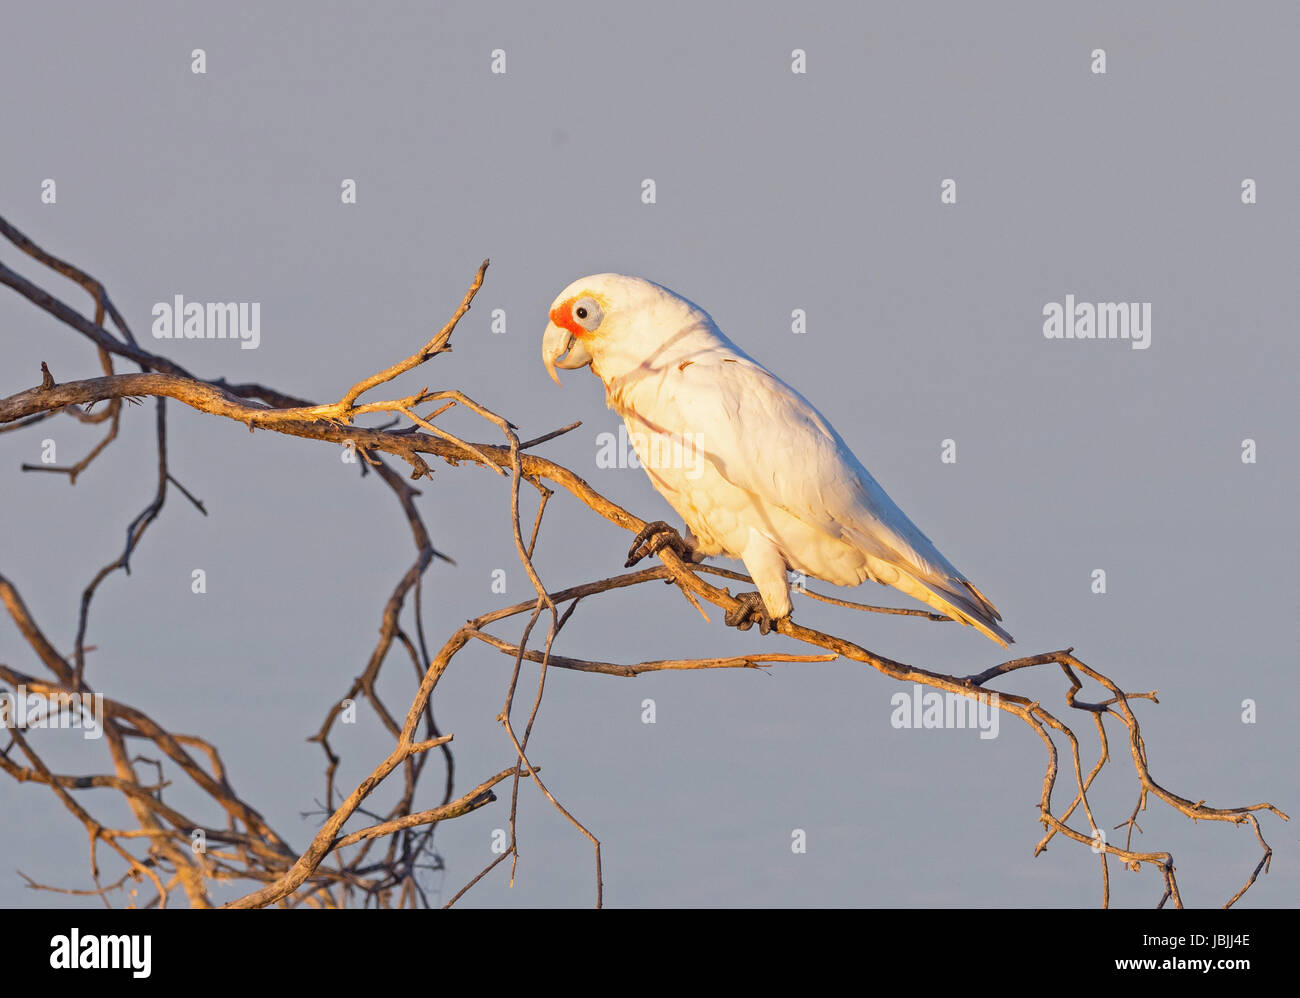 The Western Corella (Cacatua pastinator) formerly known as the Western Long-billed Corella, is a species of white cockatoo endemic to south-western We Stock Photo